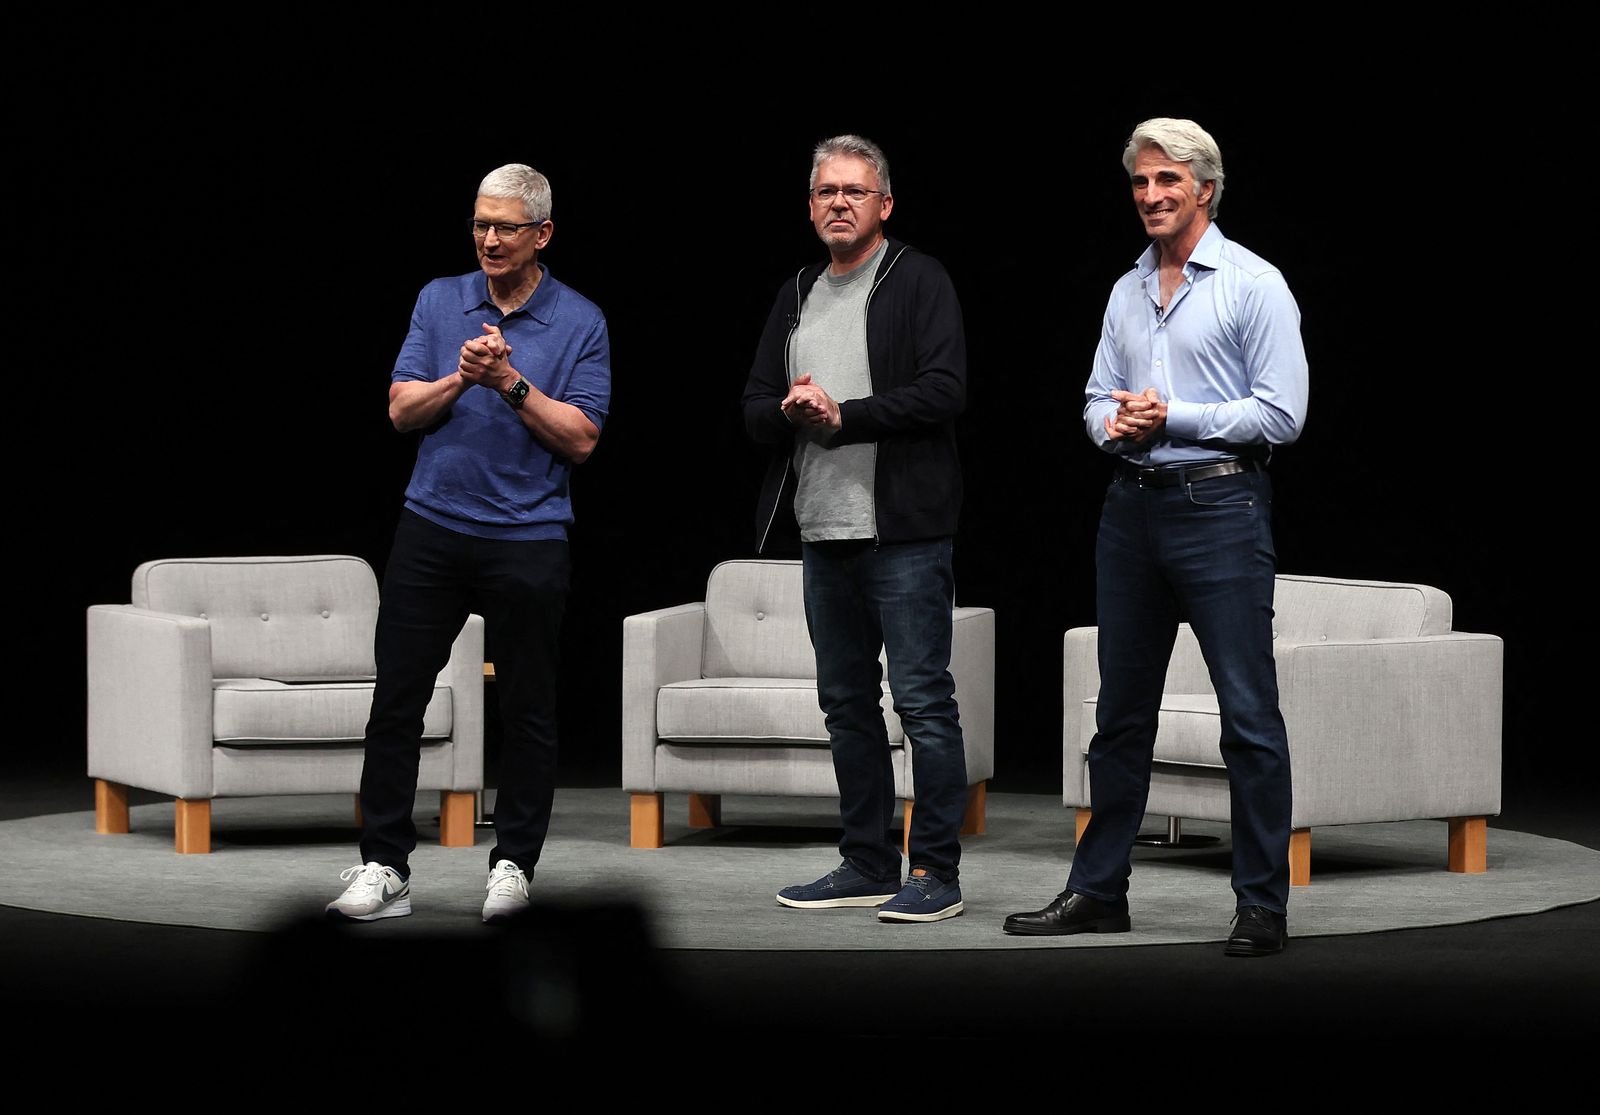 CUPERTINO, CALIFORNIA - JUNE 10: (L-R) Apple CEO Tim Cook, Apple senior vice president of machine learning and AI strategy John Giannandrea and Apple senior vice president of software engineering Craig Federighi look on during the Apple Worldwide Developers Conference (WWDC) on June 10, 2024 in Cupertino, California. Apple will announce plans to incorporate artificial intelligence (AI) into Apple software and hardware.   Justin Sullivan/Getty Images/AFP (Photo by JUSTIN SULLIVAN / GETTY IMAGES NORTH AMERICA / Getty Images via AFP)